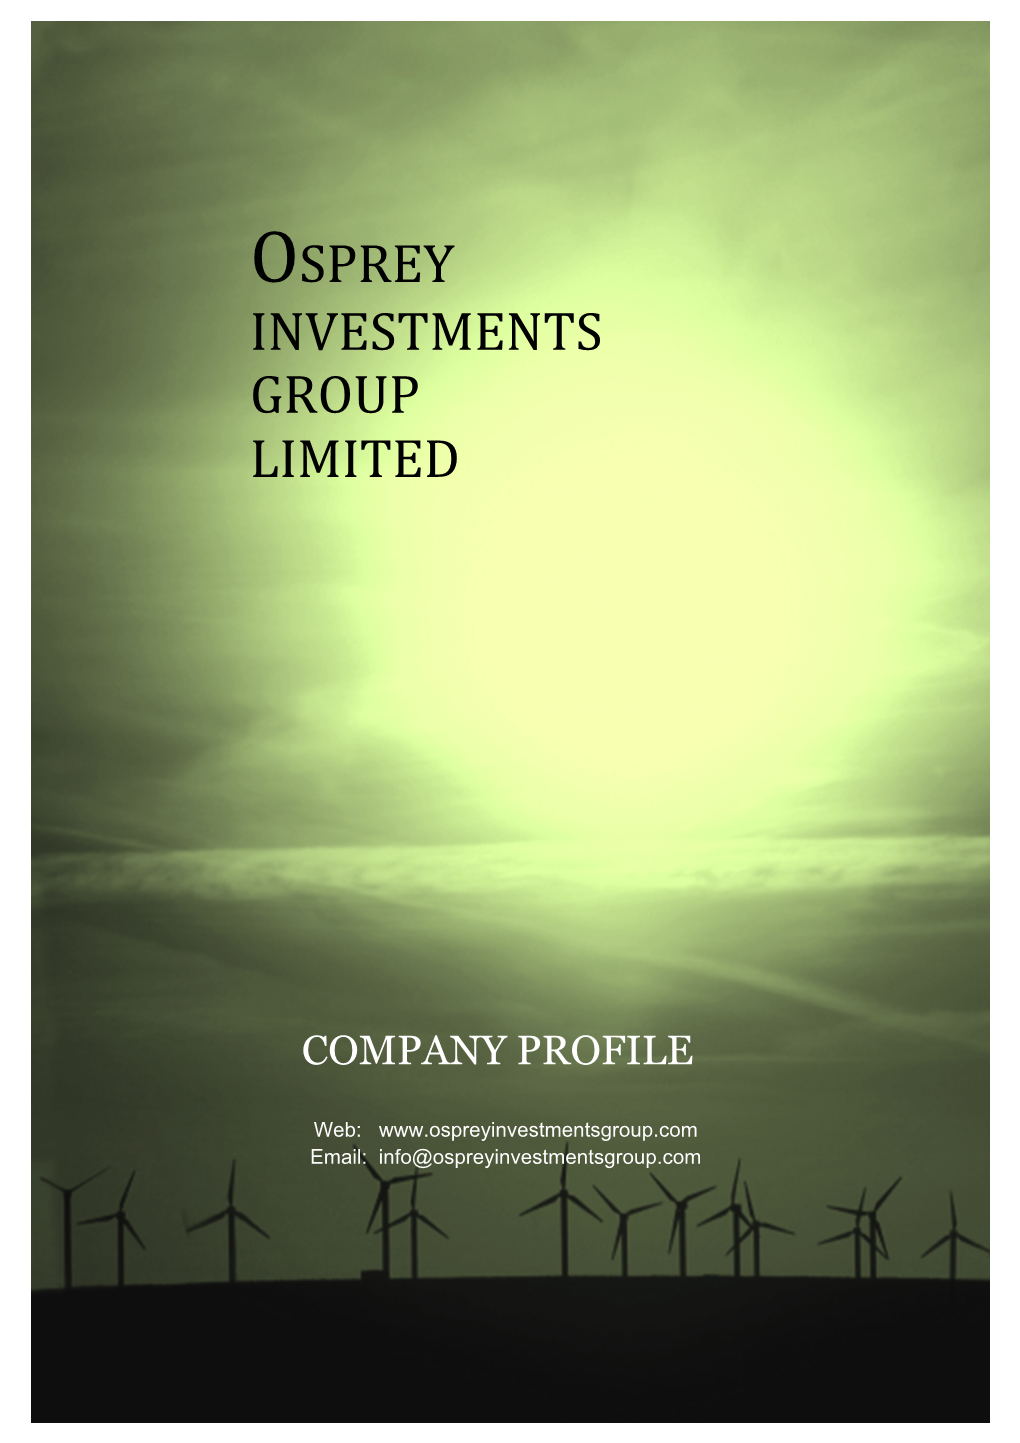 Osprey Investments Group Limited